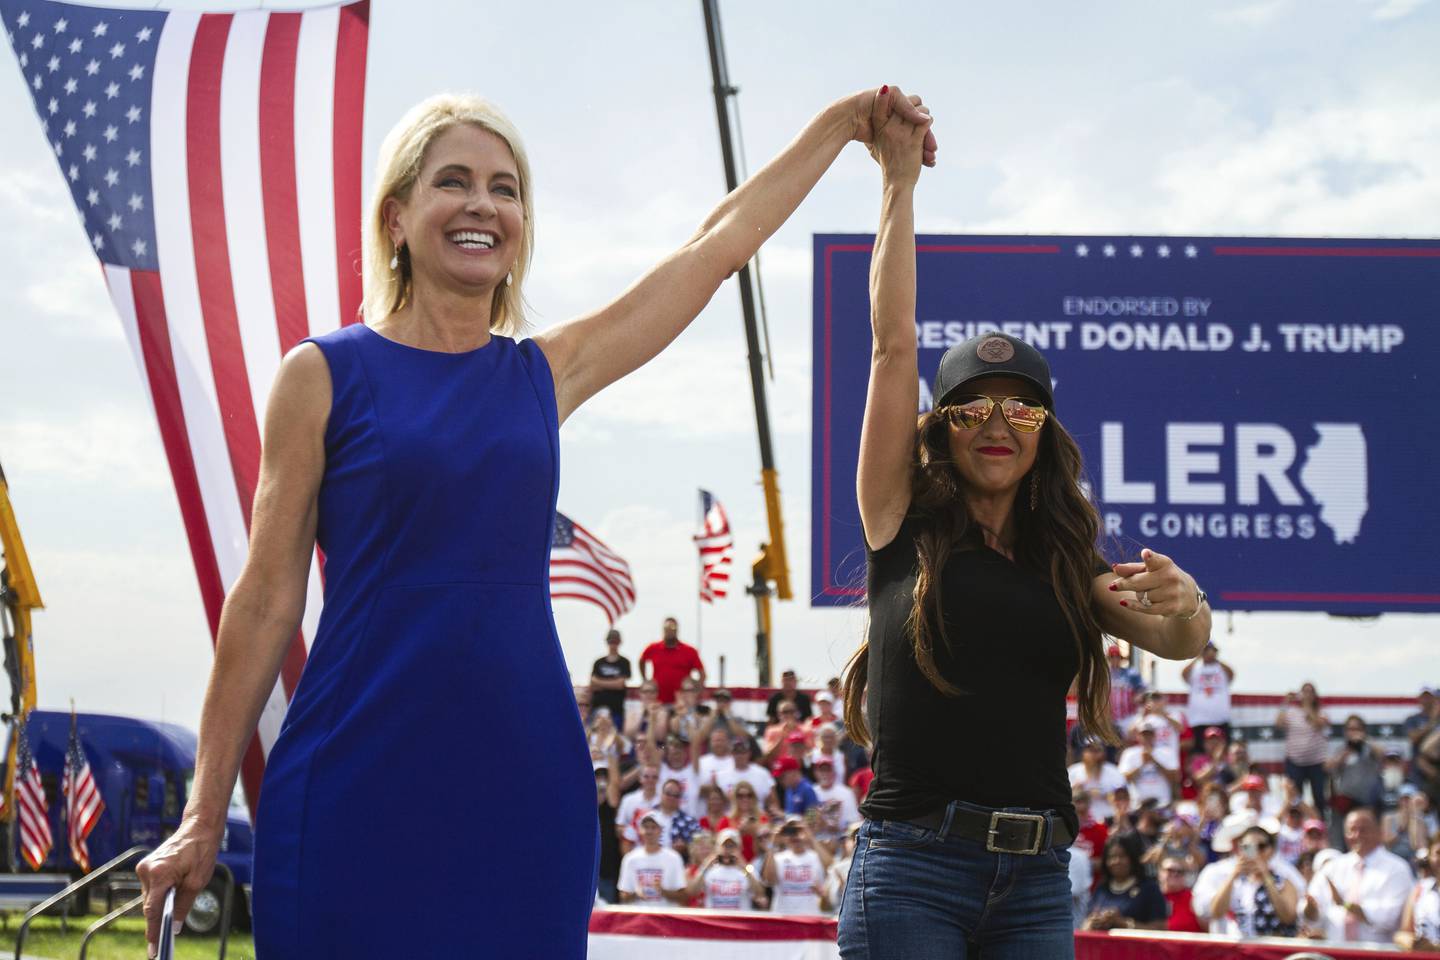 U.S. Rep. Mary Miller, of Illinois, left, is joined by U.S. Rep. Lauren Boebert, of Colorado, on stage at a rally at the Adams County Fairgrounds in Mendon, Ill., Saturday, June 25, 2022. (Mike Sorensen/Quincy Herald-Whig via AP)